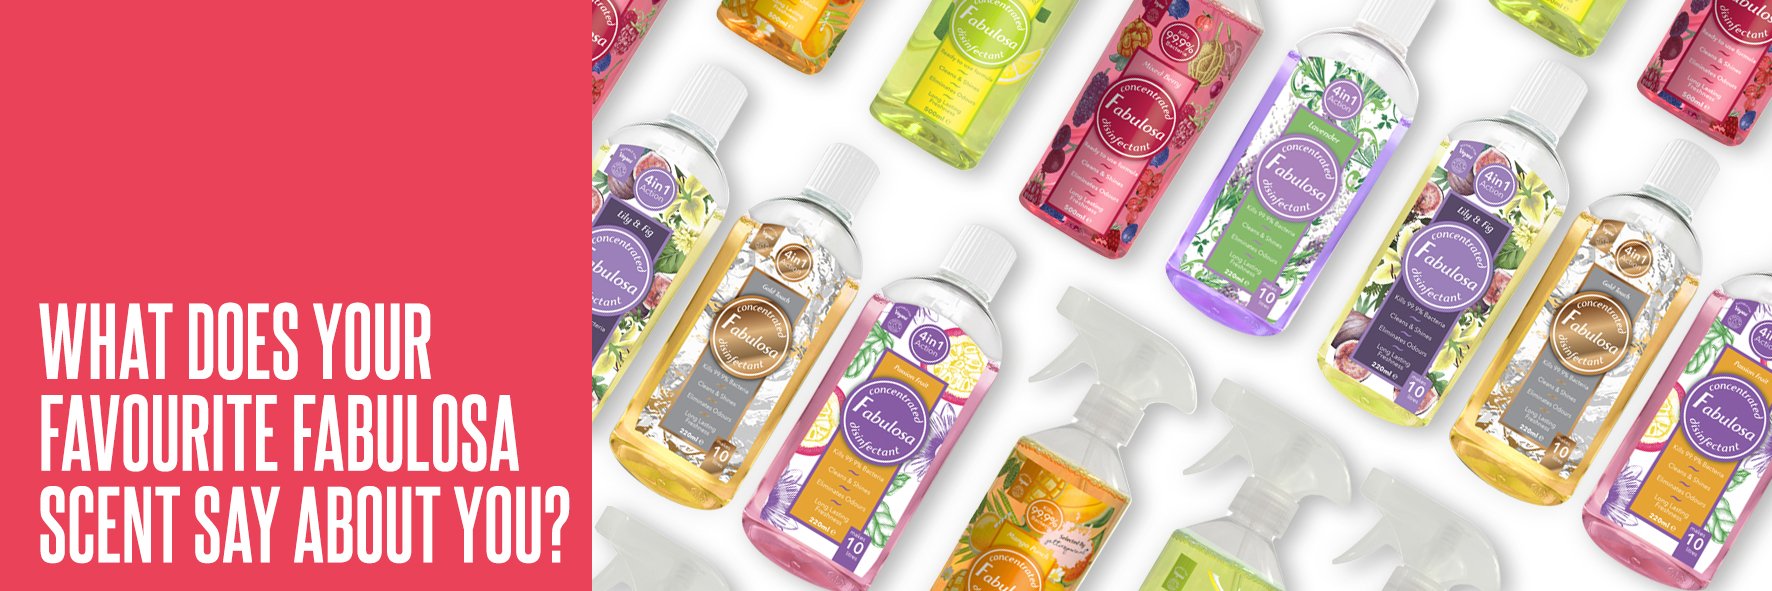 What Does Your Favourite Fabulosa Scent Say About You? - FabFinds